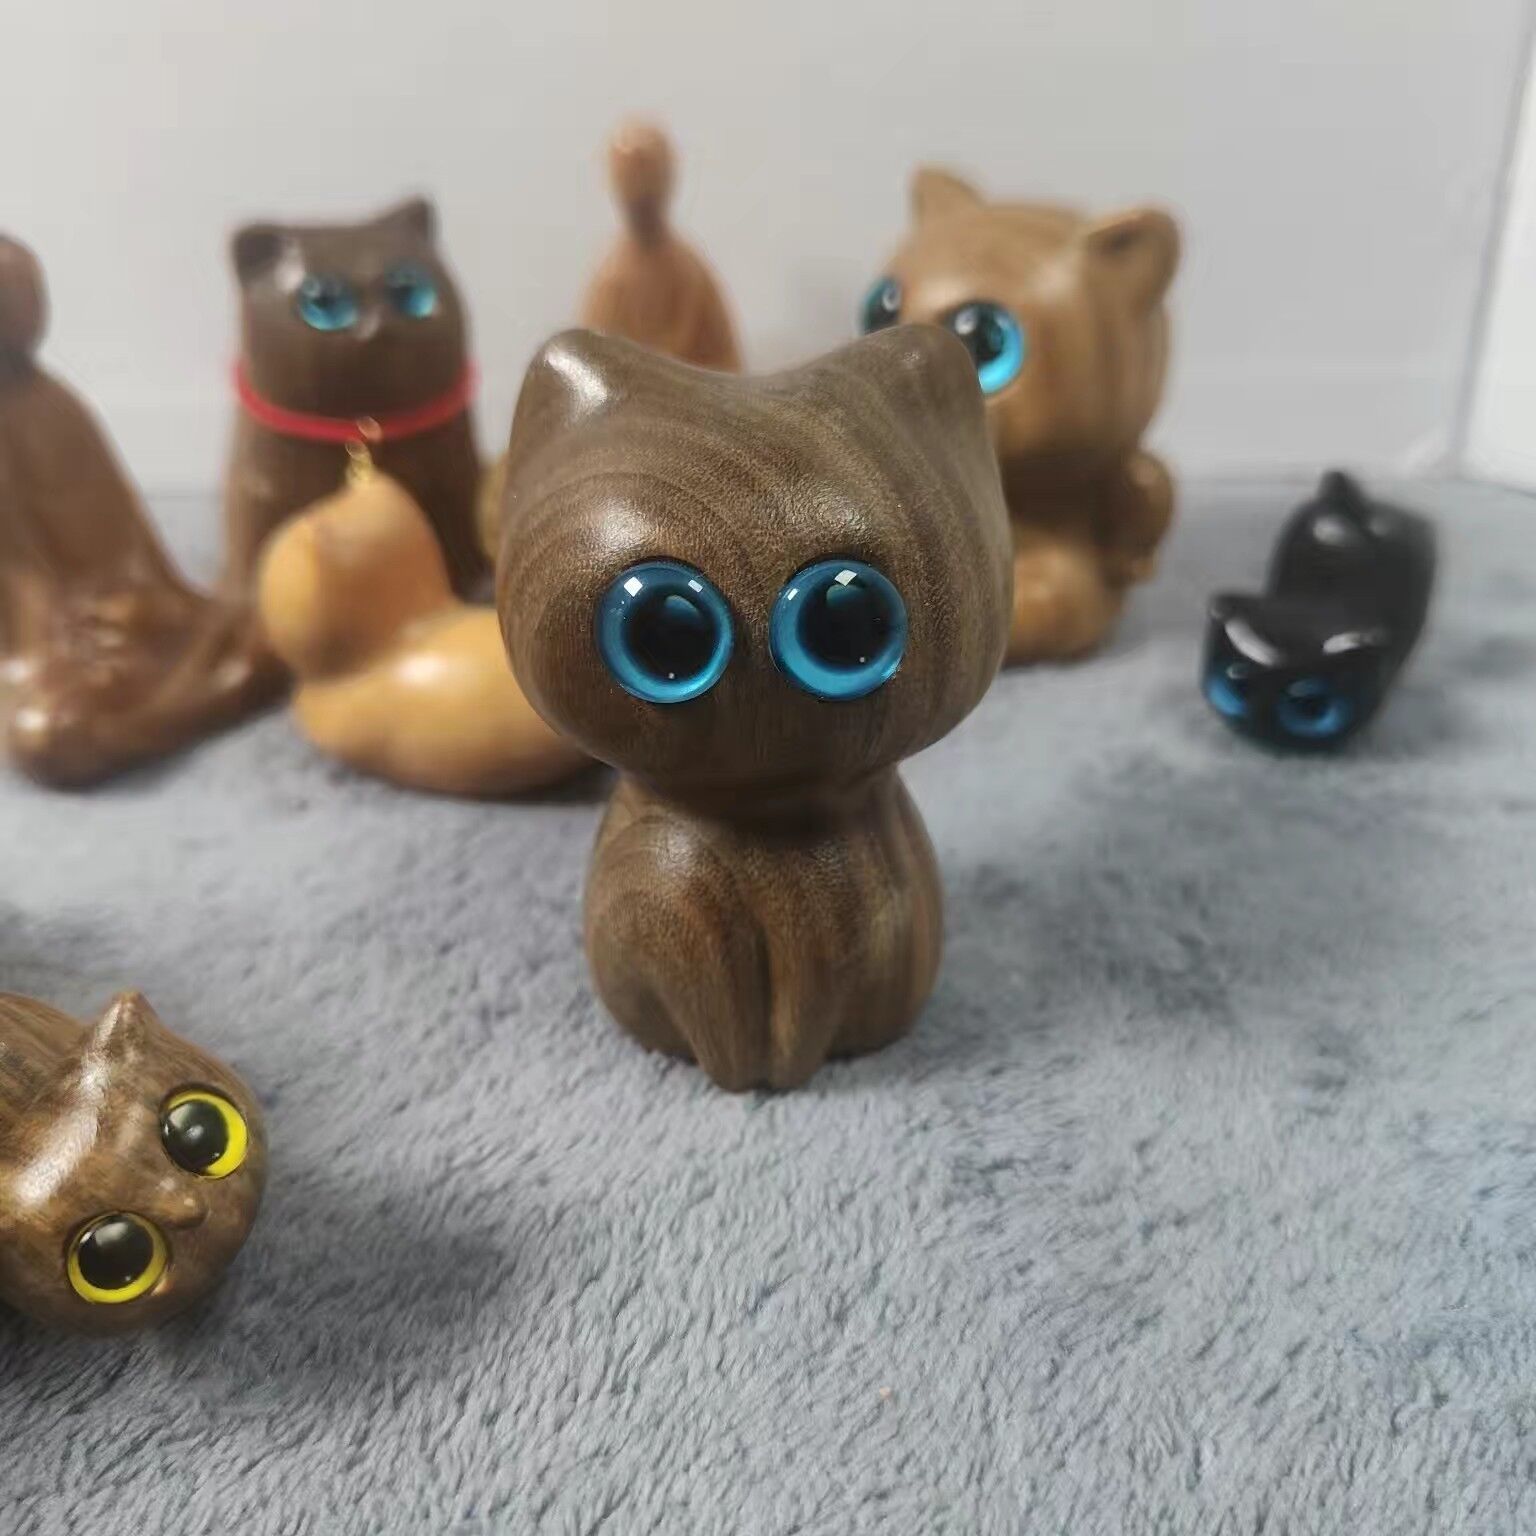 ❤️(Mother's Hot Day Sale - 50% OFF) Sandalwood Hand-carved Wood Cat - Buy 6 Get Extra 20% OFF&Free shipping